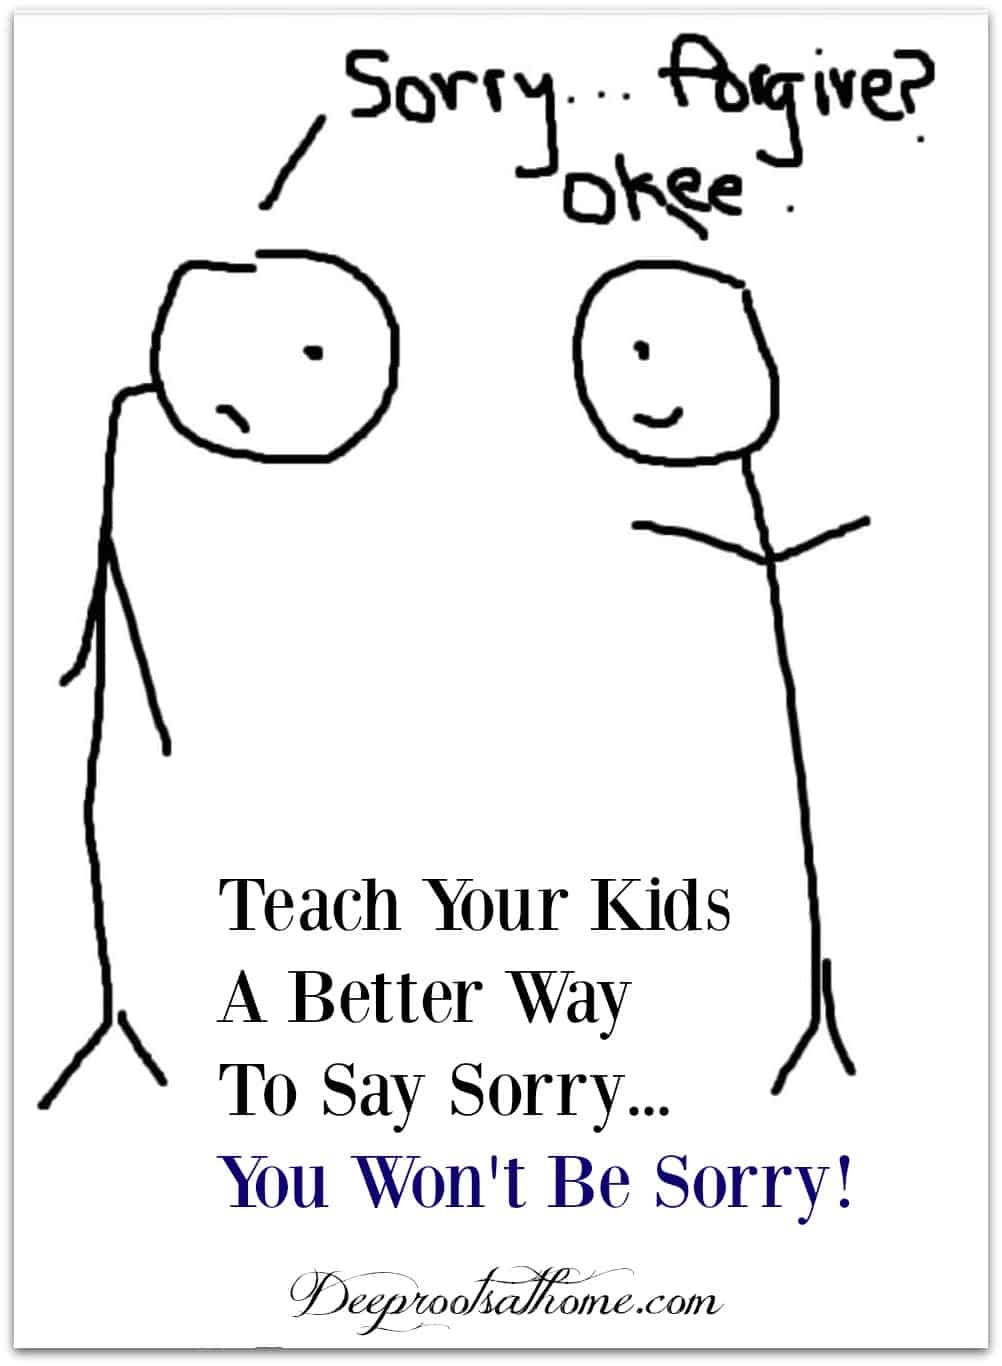 Teach Your Kids A Better Way to Say Sorry...You Won't Be Sorry!, drawing of stick men asking forgiveness or saying sorry